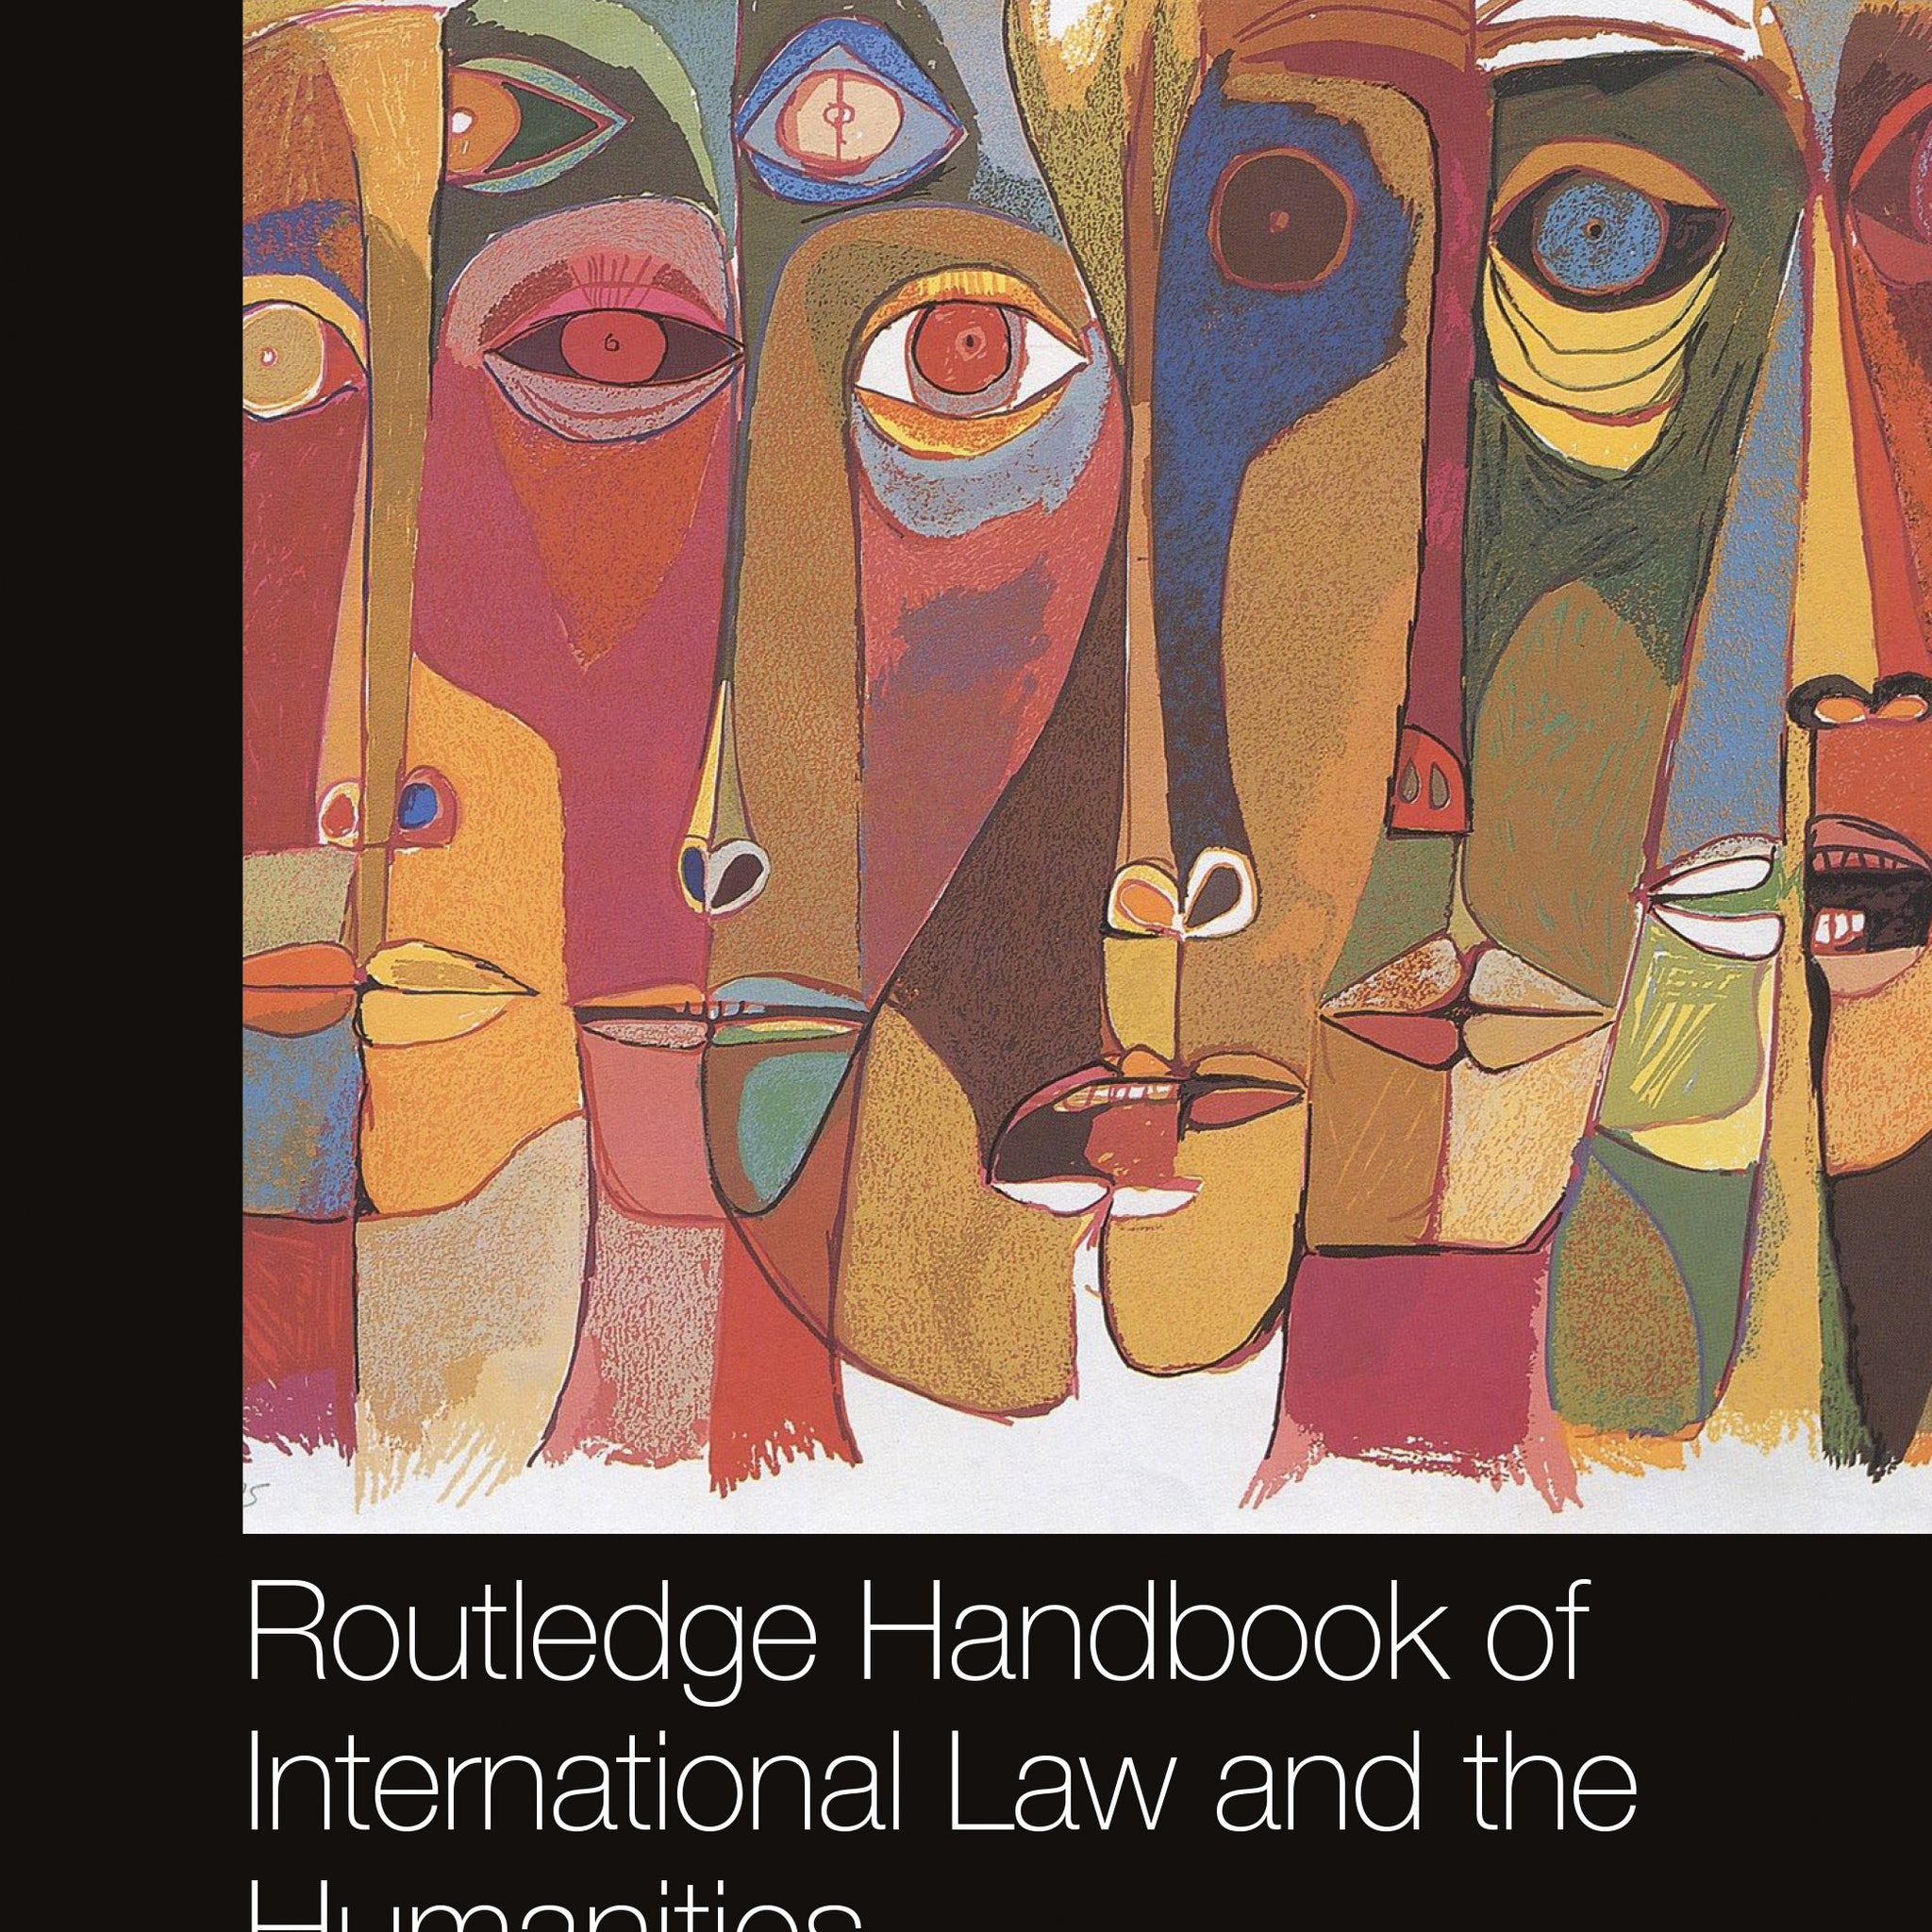 Routledge Handbook of International Law and the Humanities